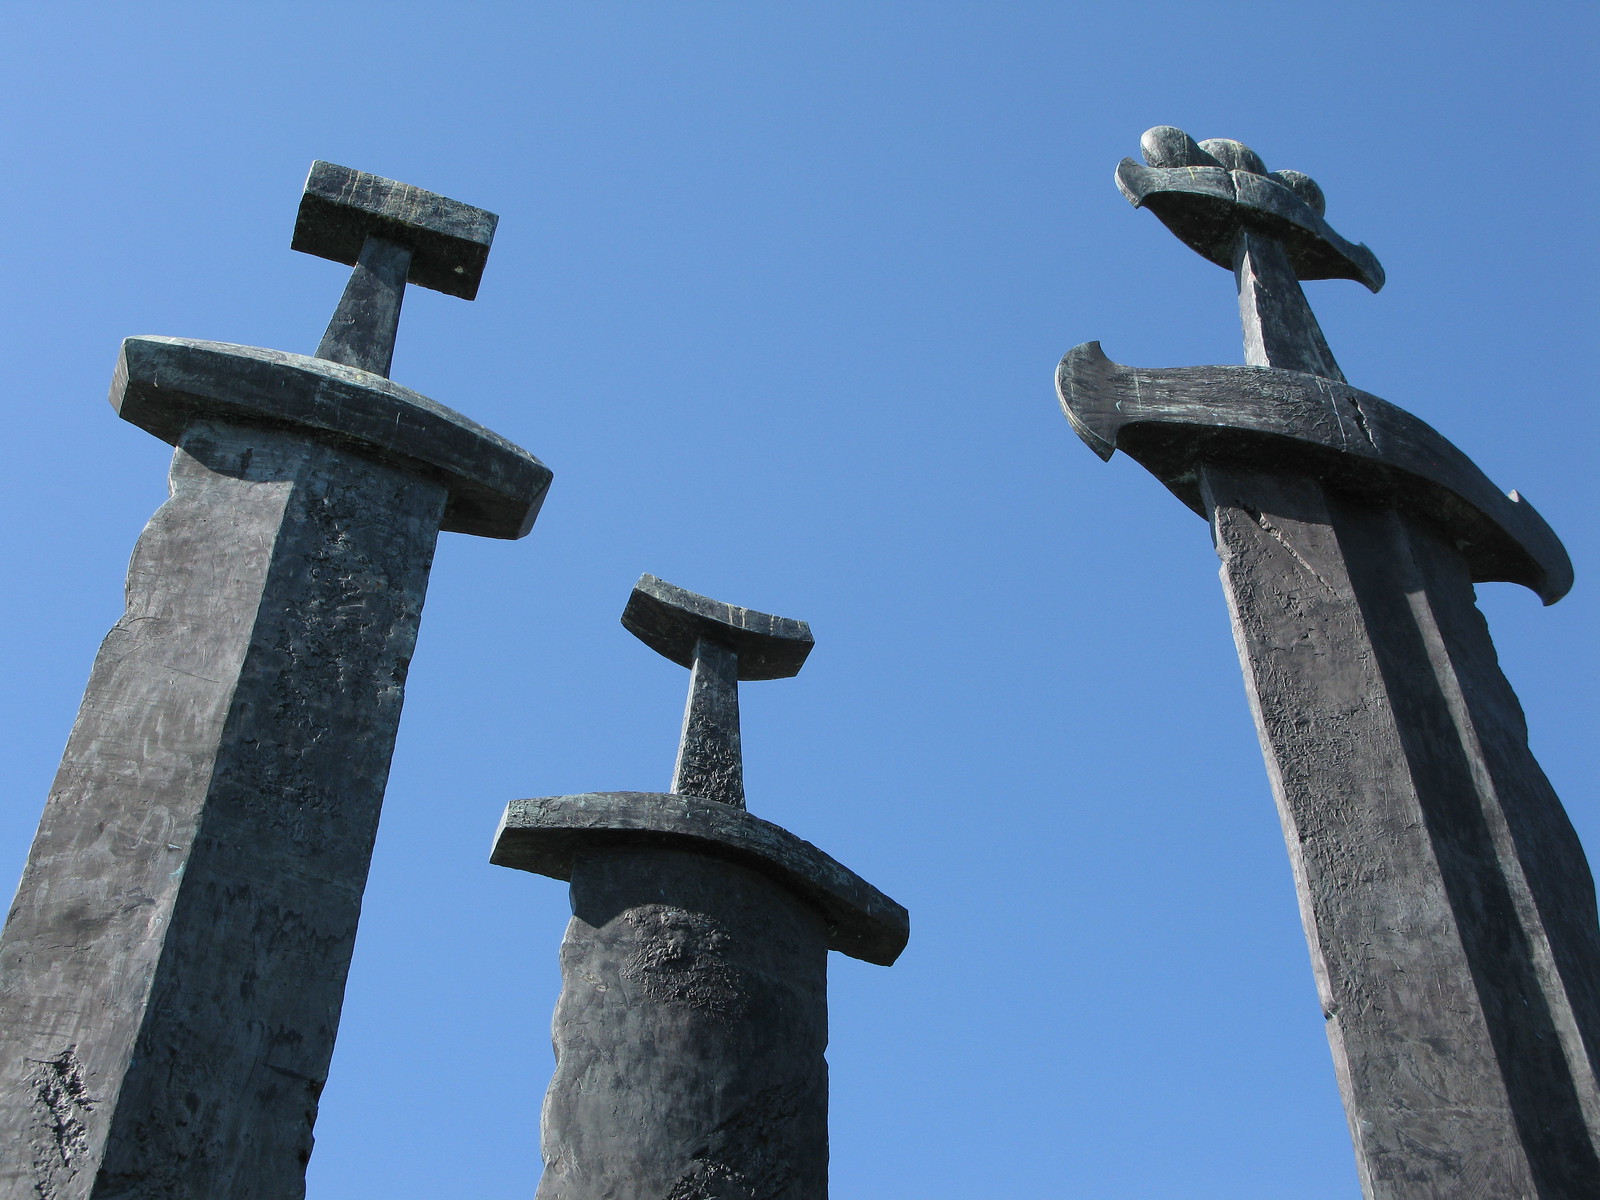 The handles of three gigantic sword statues seen against a blue sky